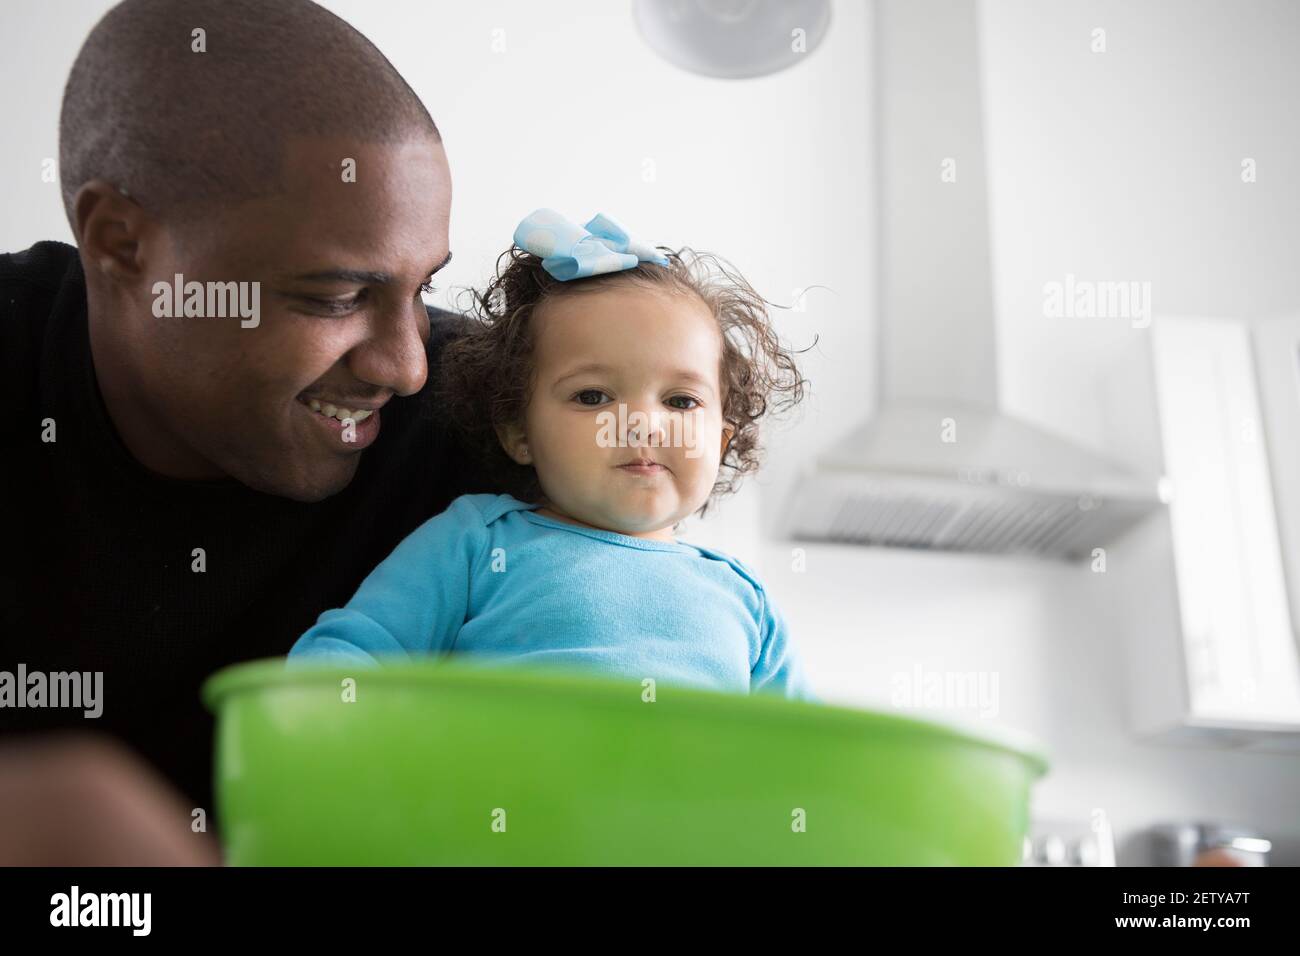 A Dad spends time in the kithchen with his daughter. They are baking, Stock Photo